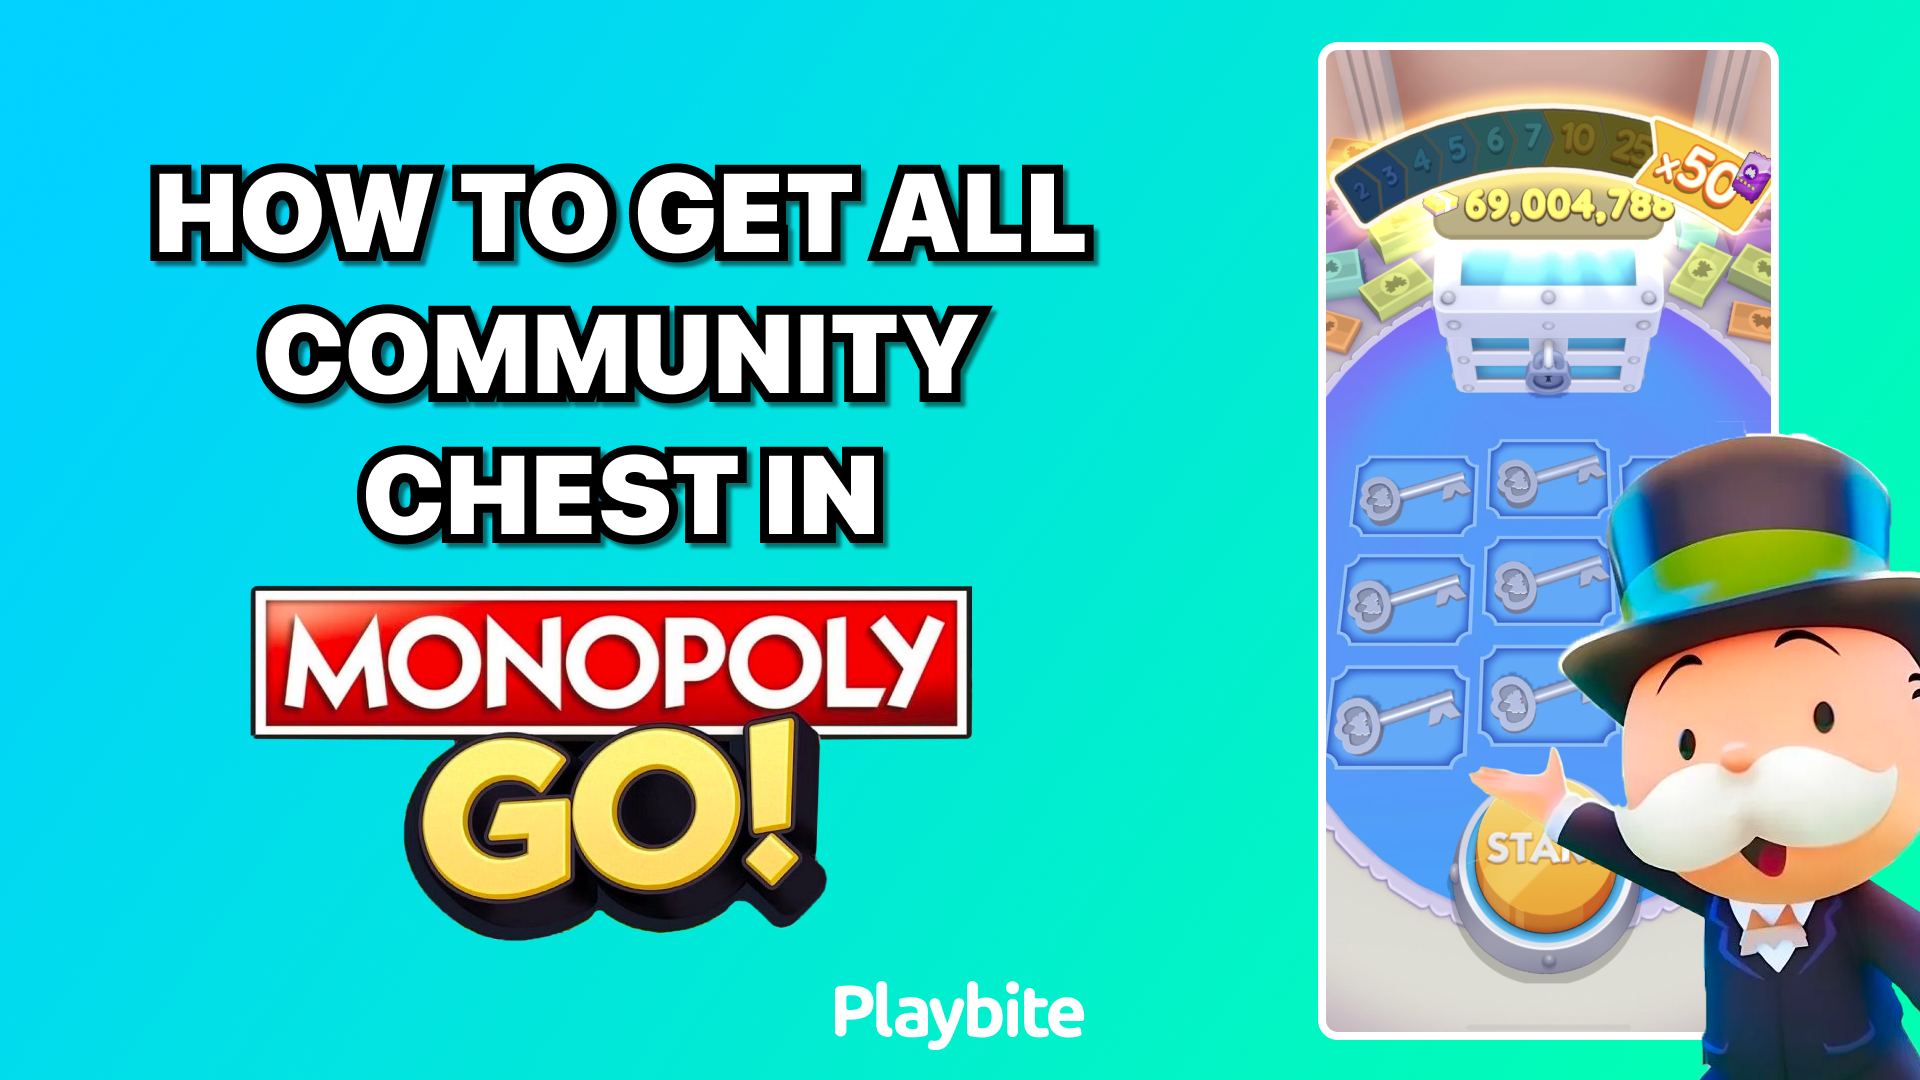 How to Get All Community Chest in Monopoly Go